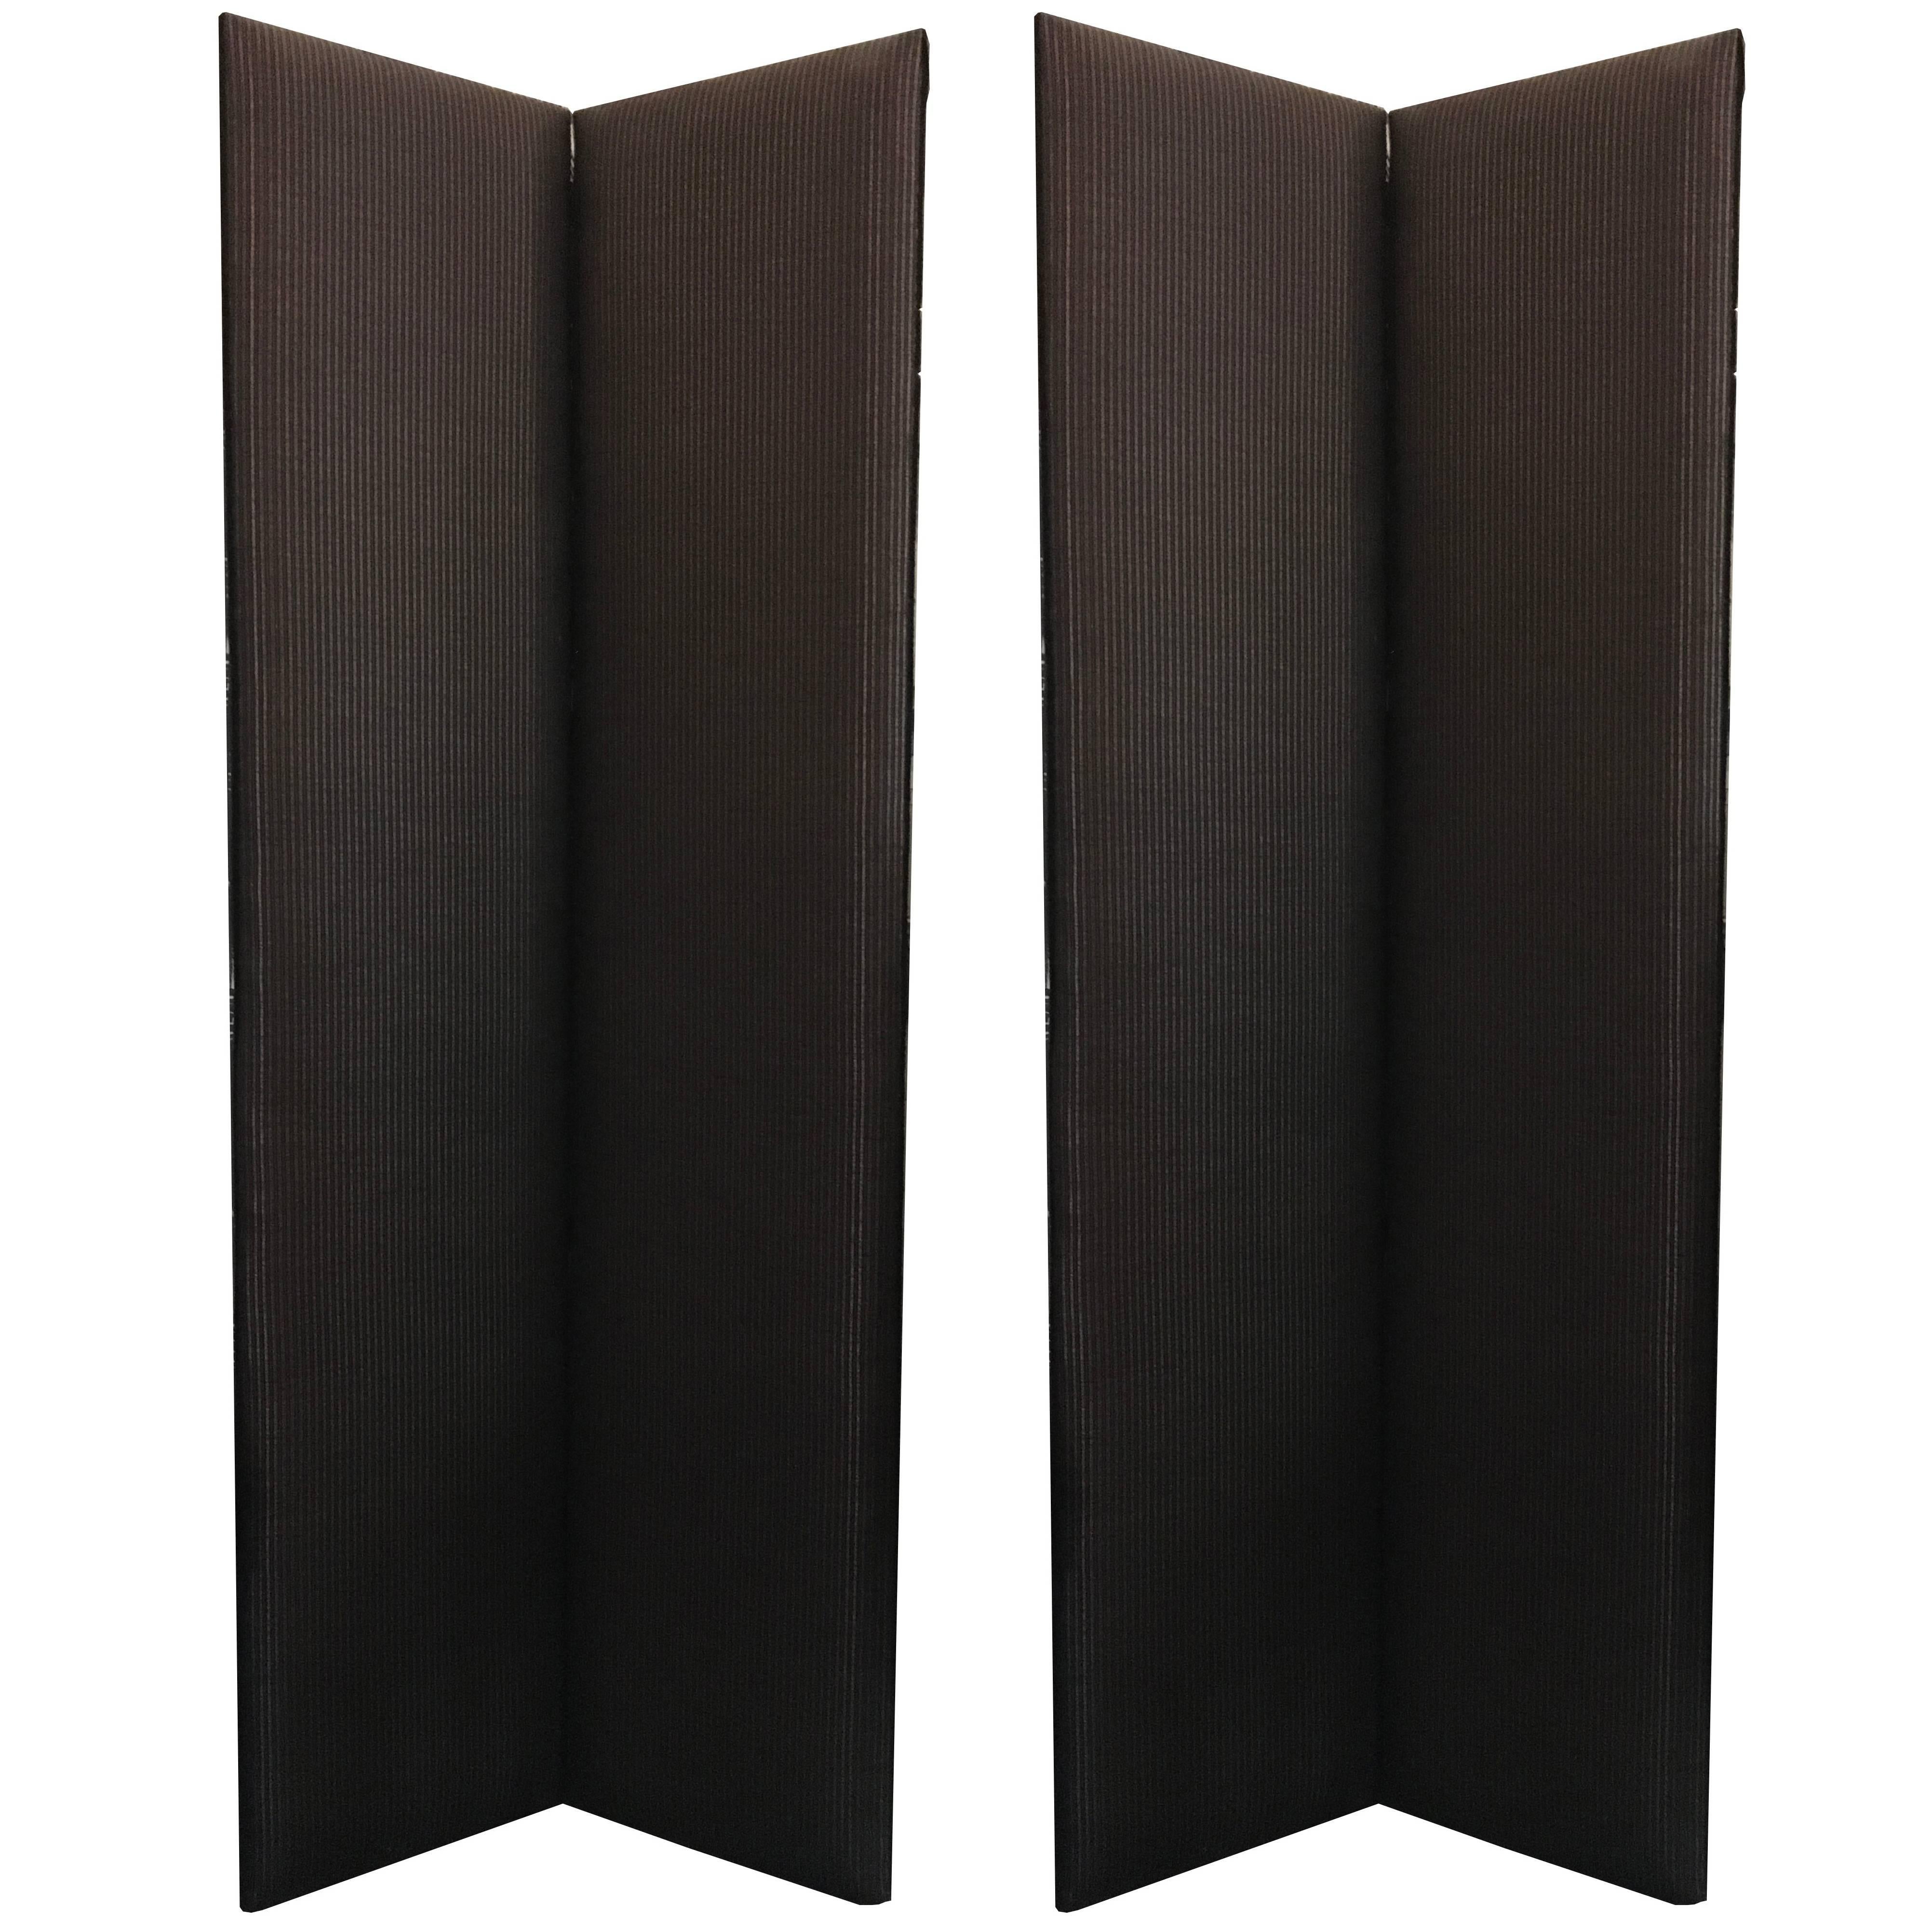 1990 Post Modern Set of Two Black and Brown Rafia Upholstered Screens